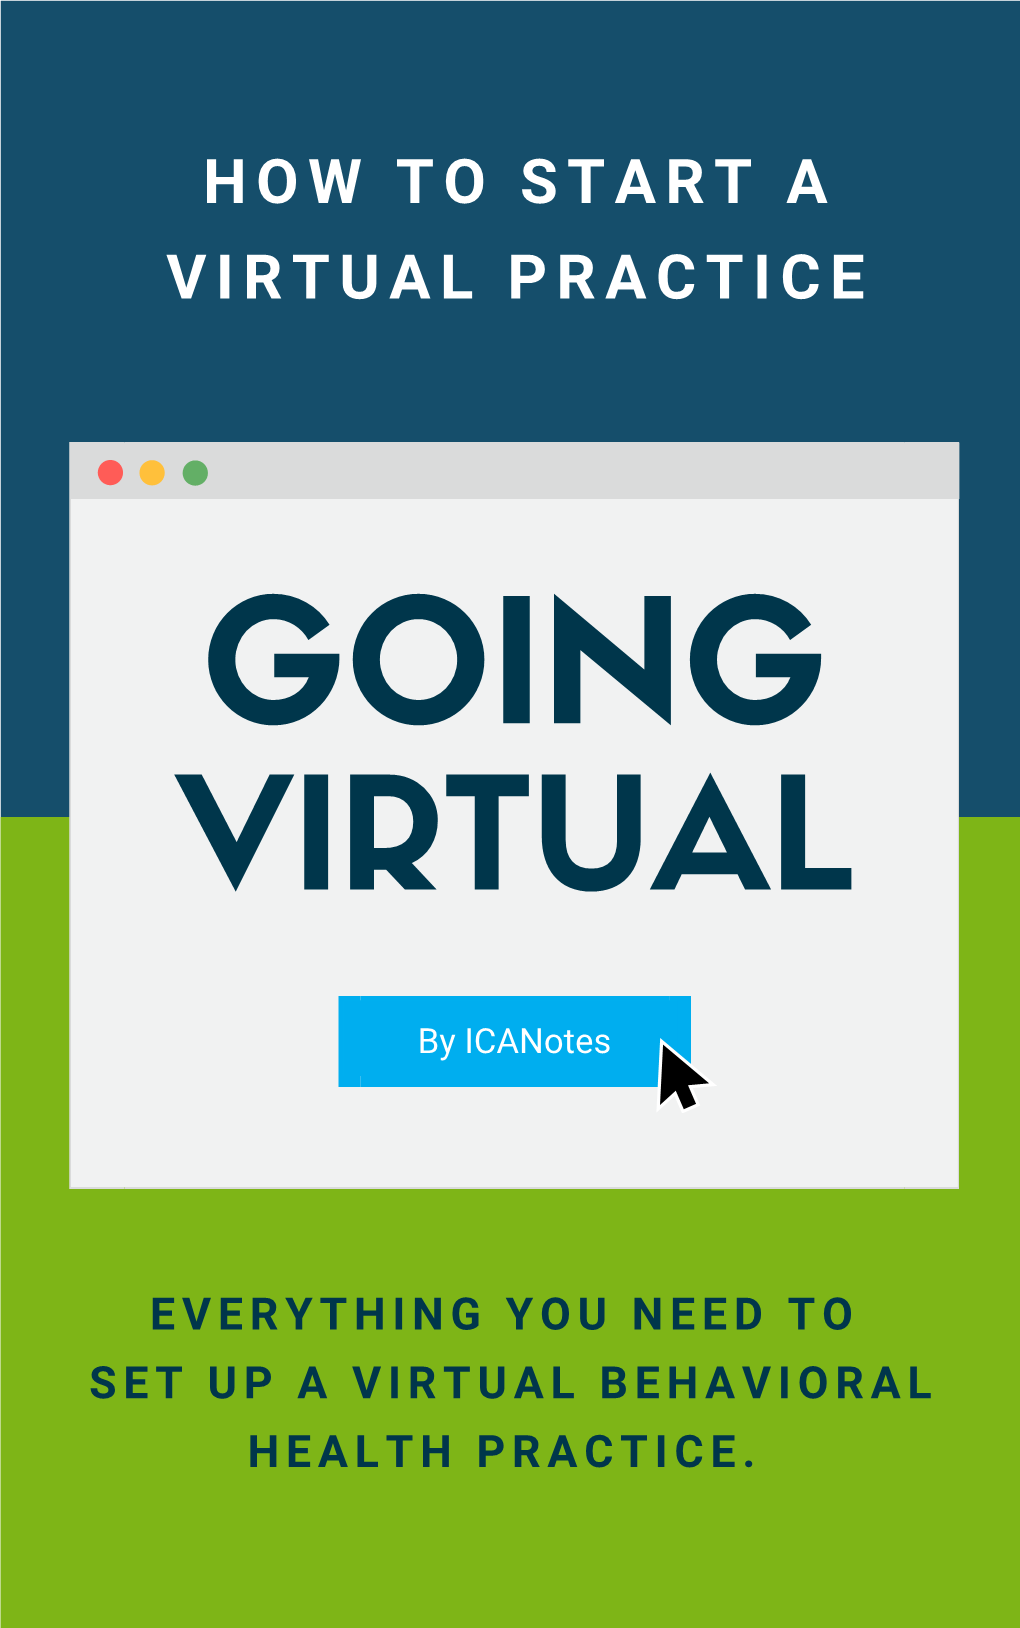 How to Start a Virtual Practice